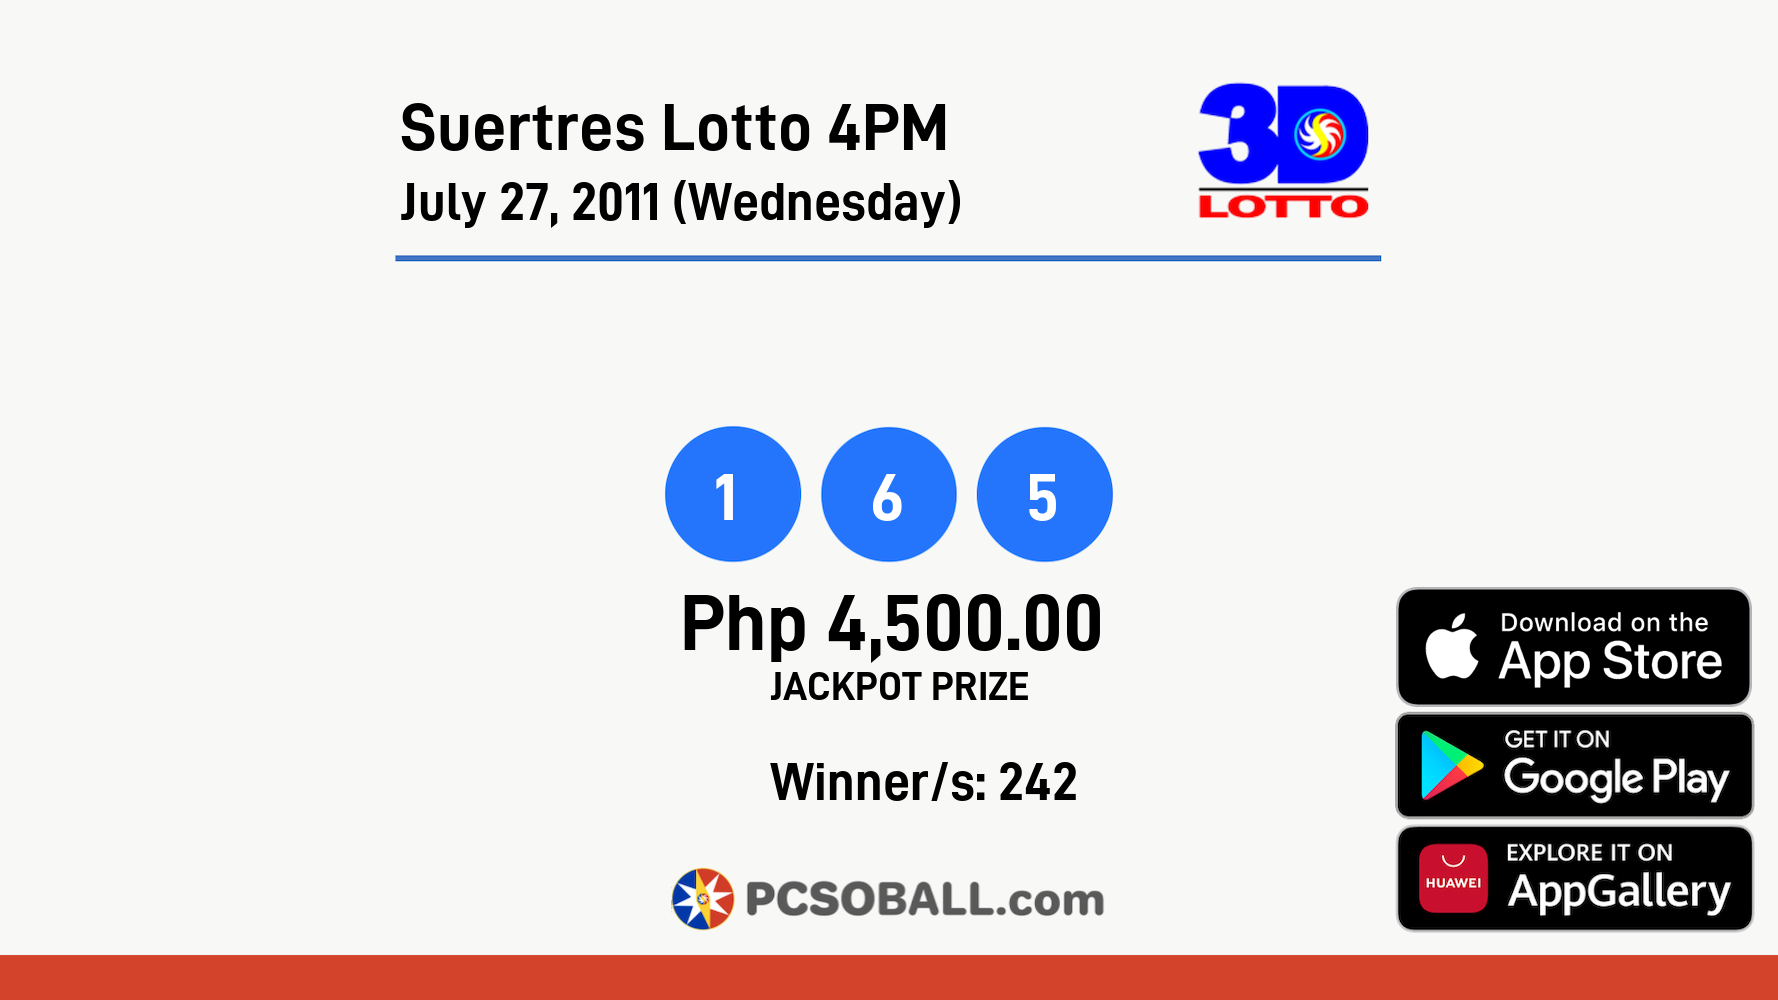 Suertres Lotto 4PM July 27, 2011 (Wednesday) Result